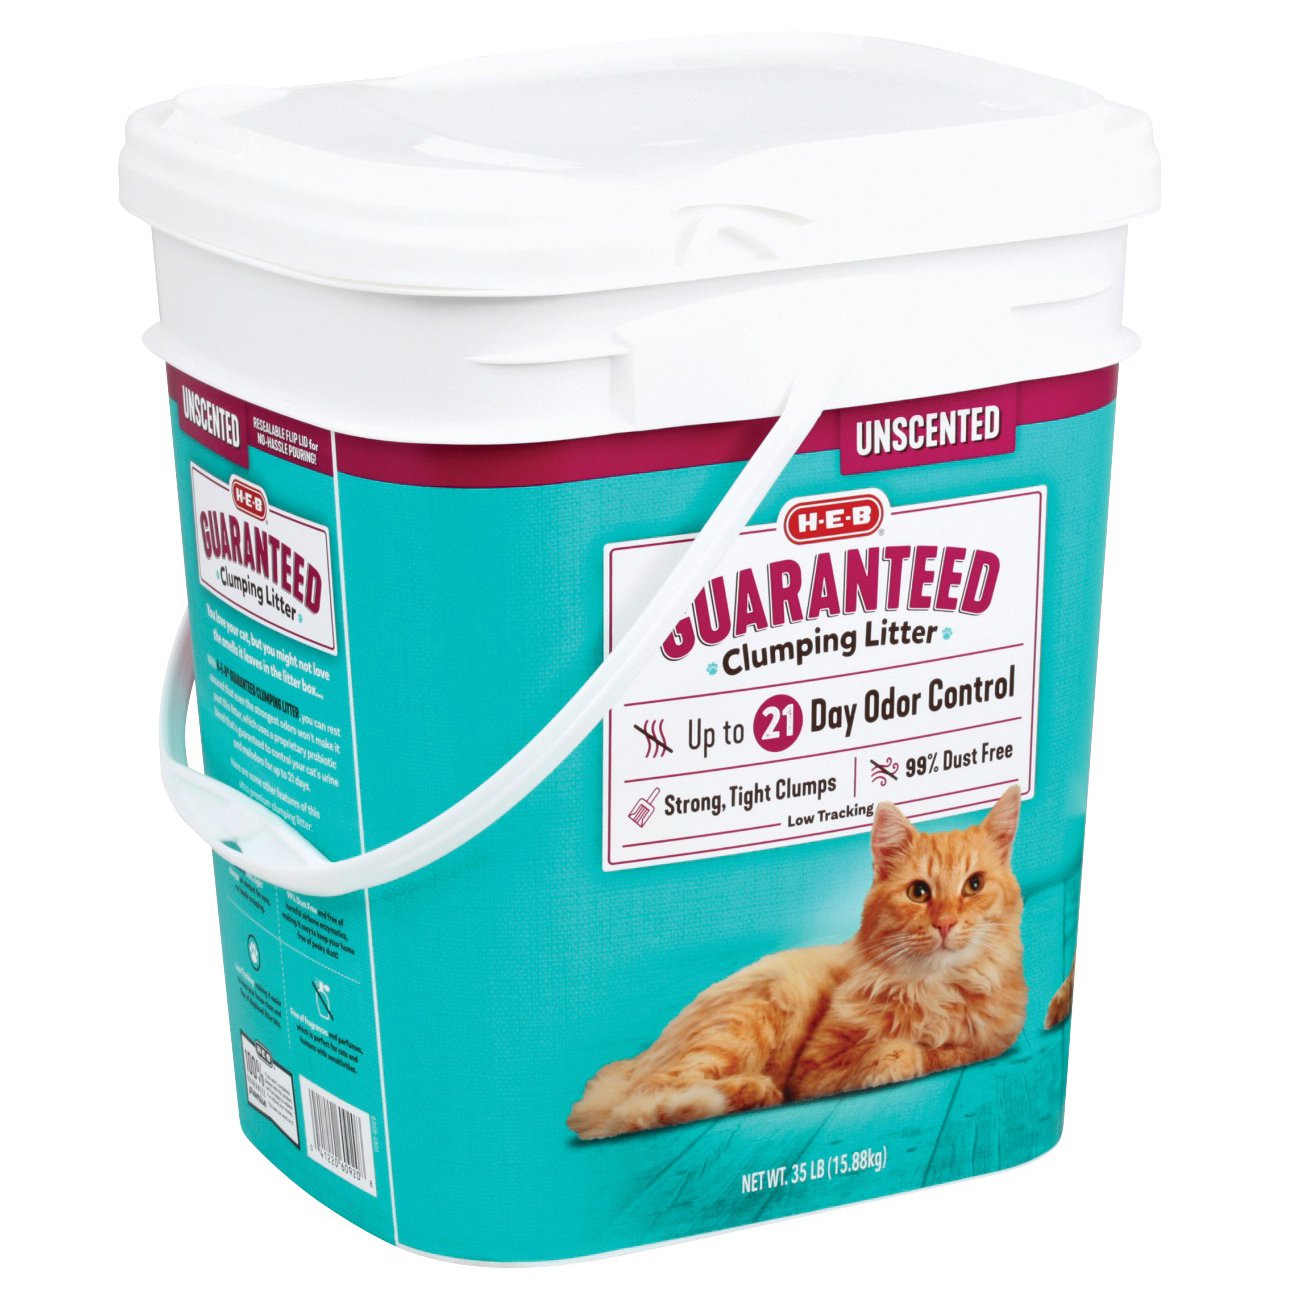 HEB Unscented Odor Control Guaranteed Clumping Litter Shop Cats at